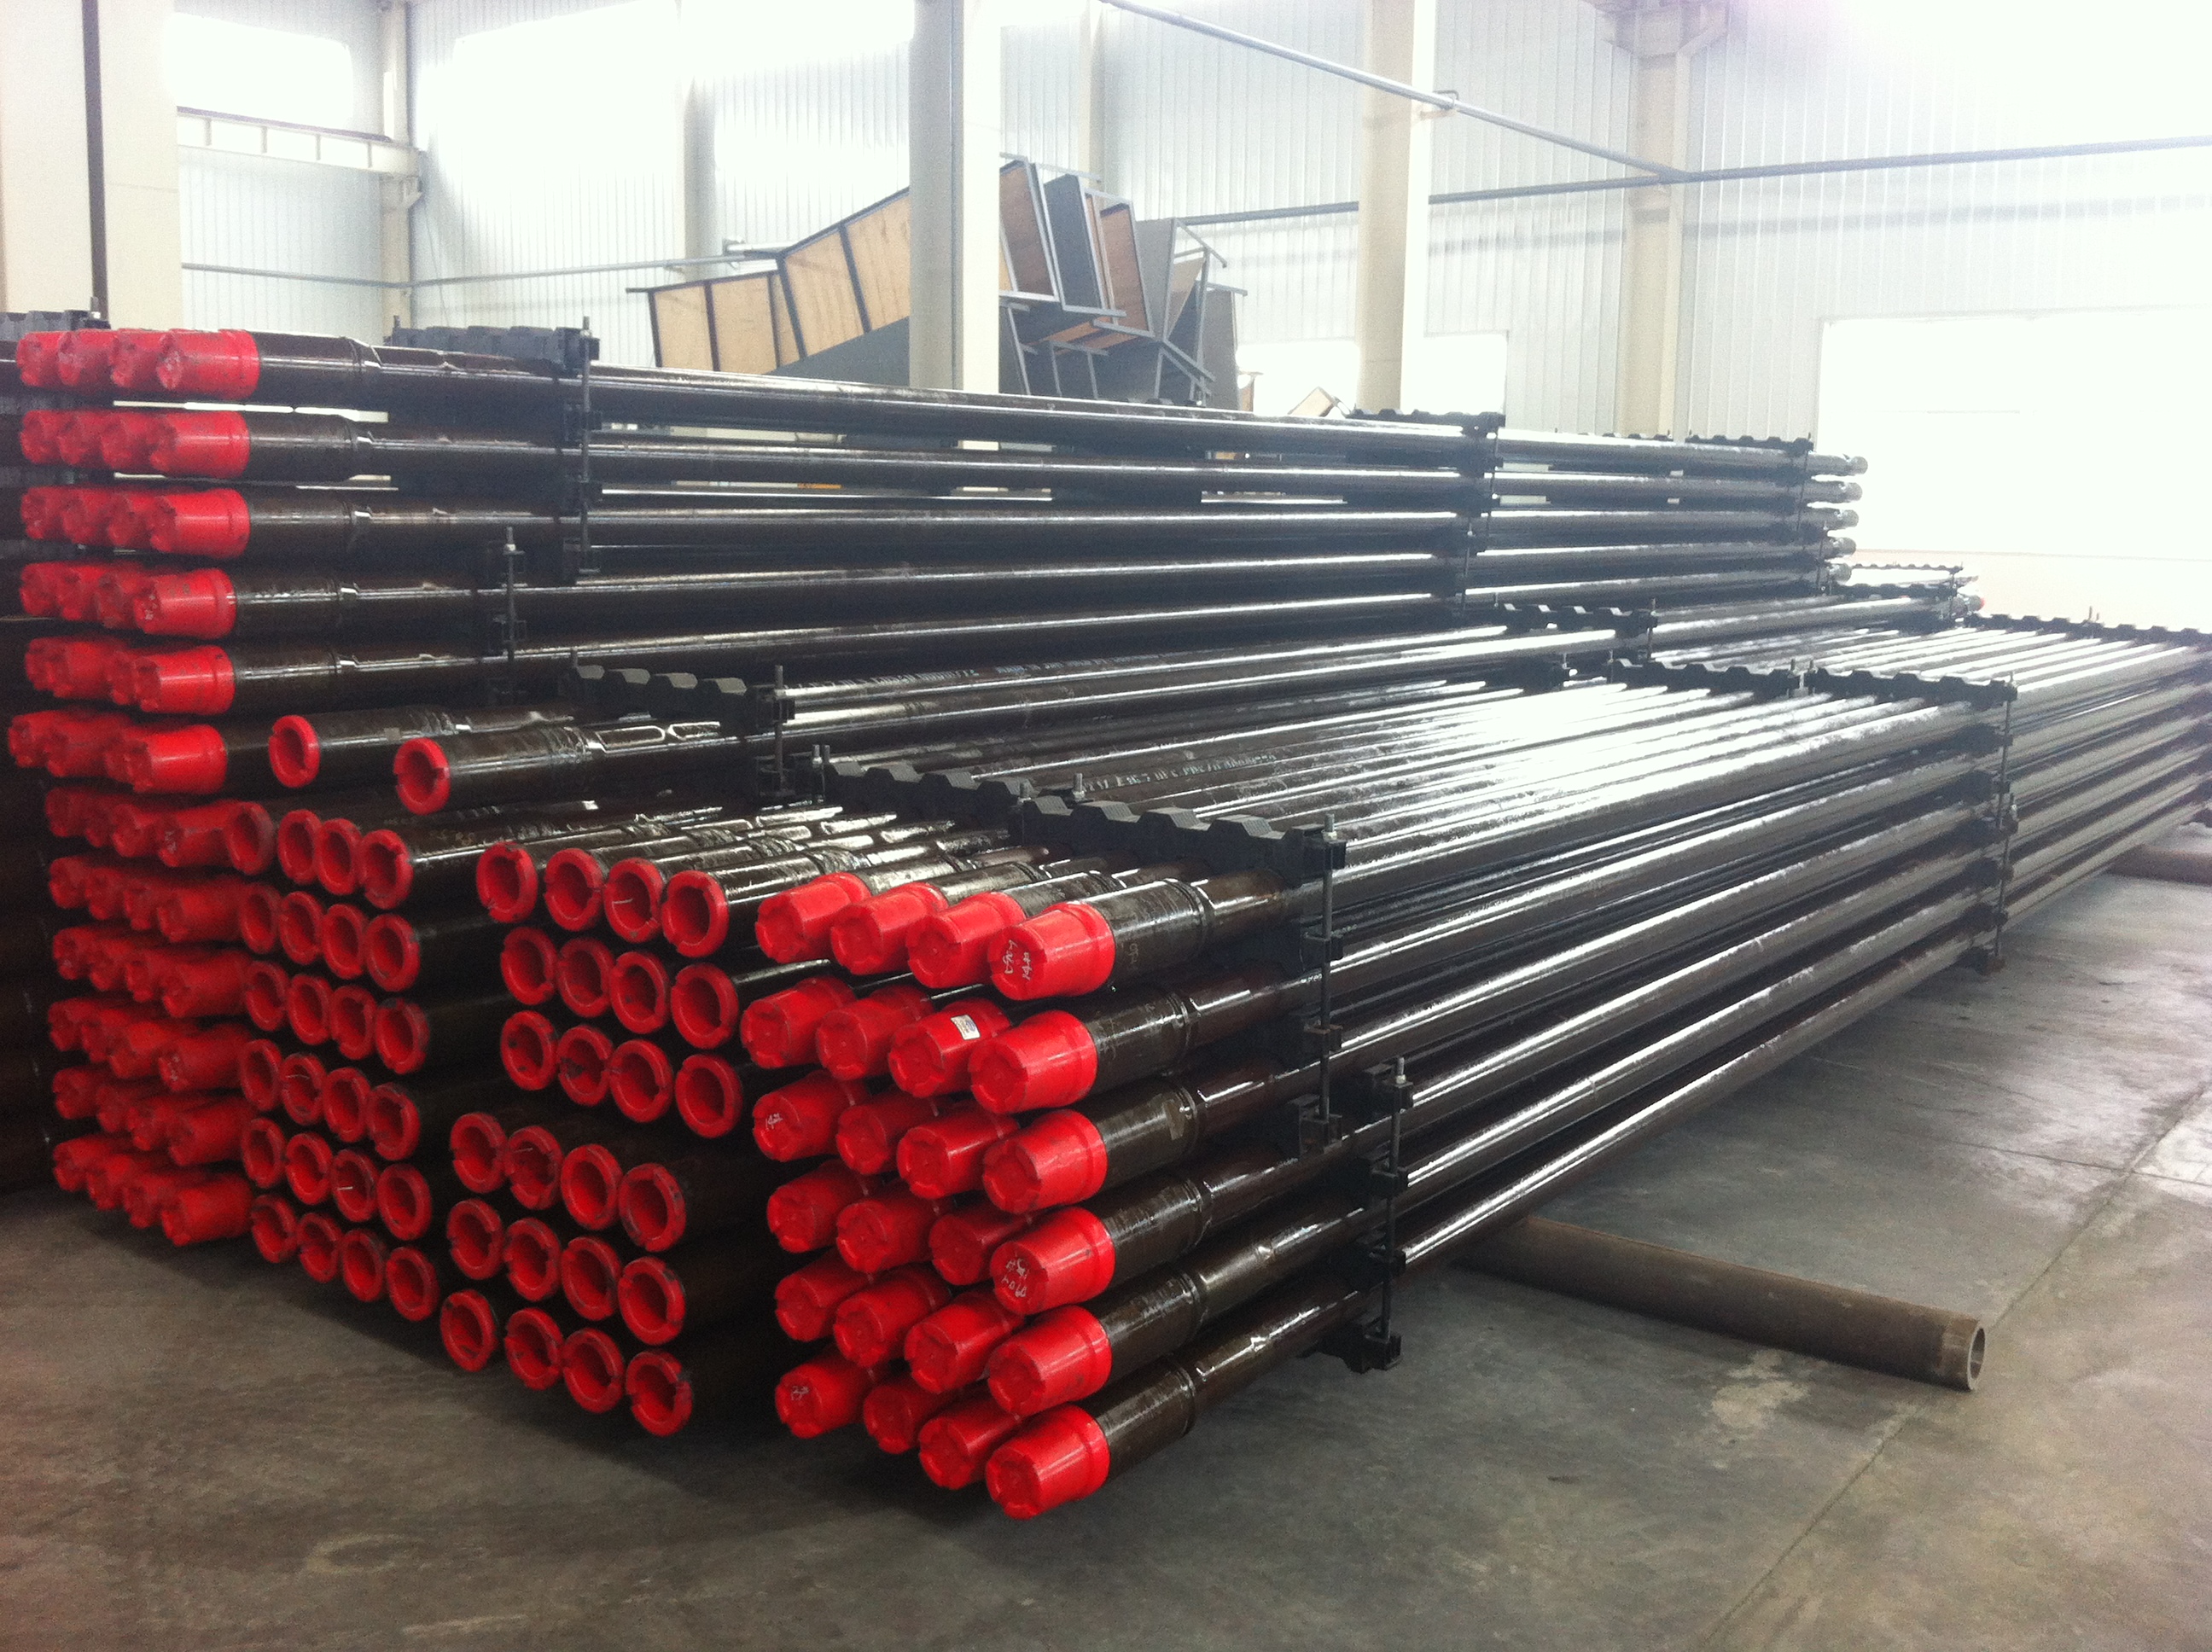 Standard Rig Square Kelly Bar Drilling Hexagonal Kelly Pipe for Oilfield 41.API 5D 5DP G105 5-1/2 Drill Pipe for Oilfield Rig